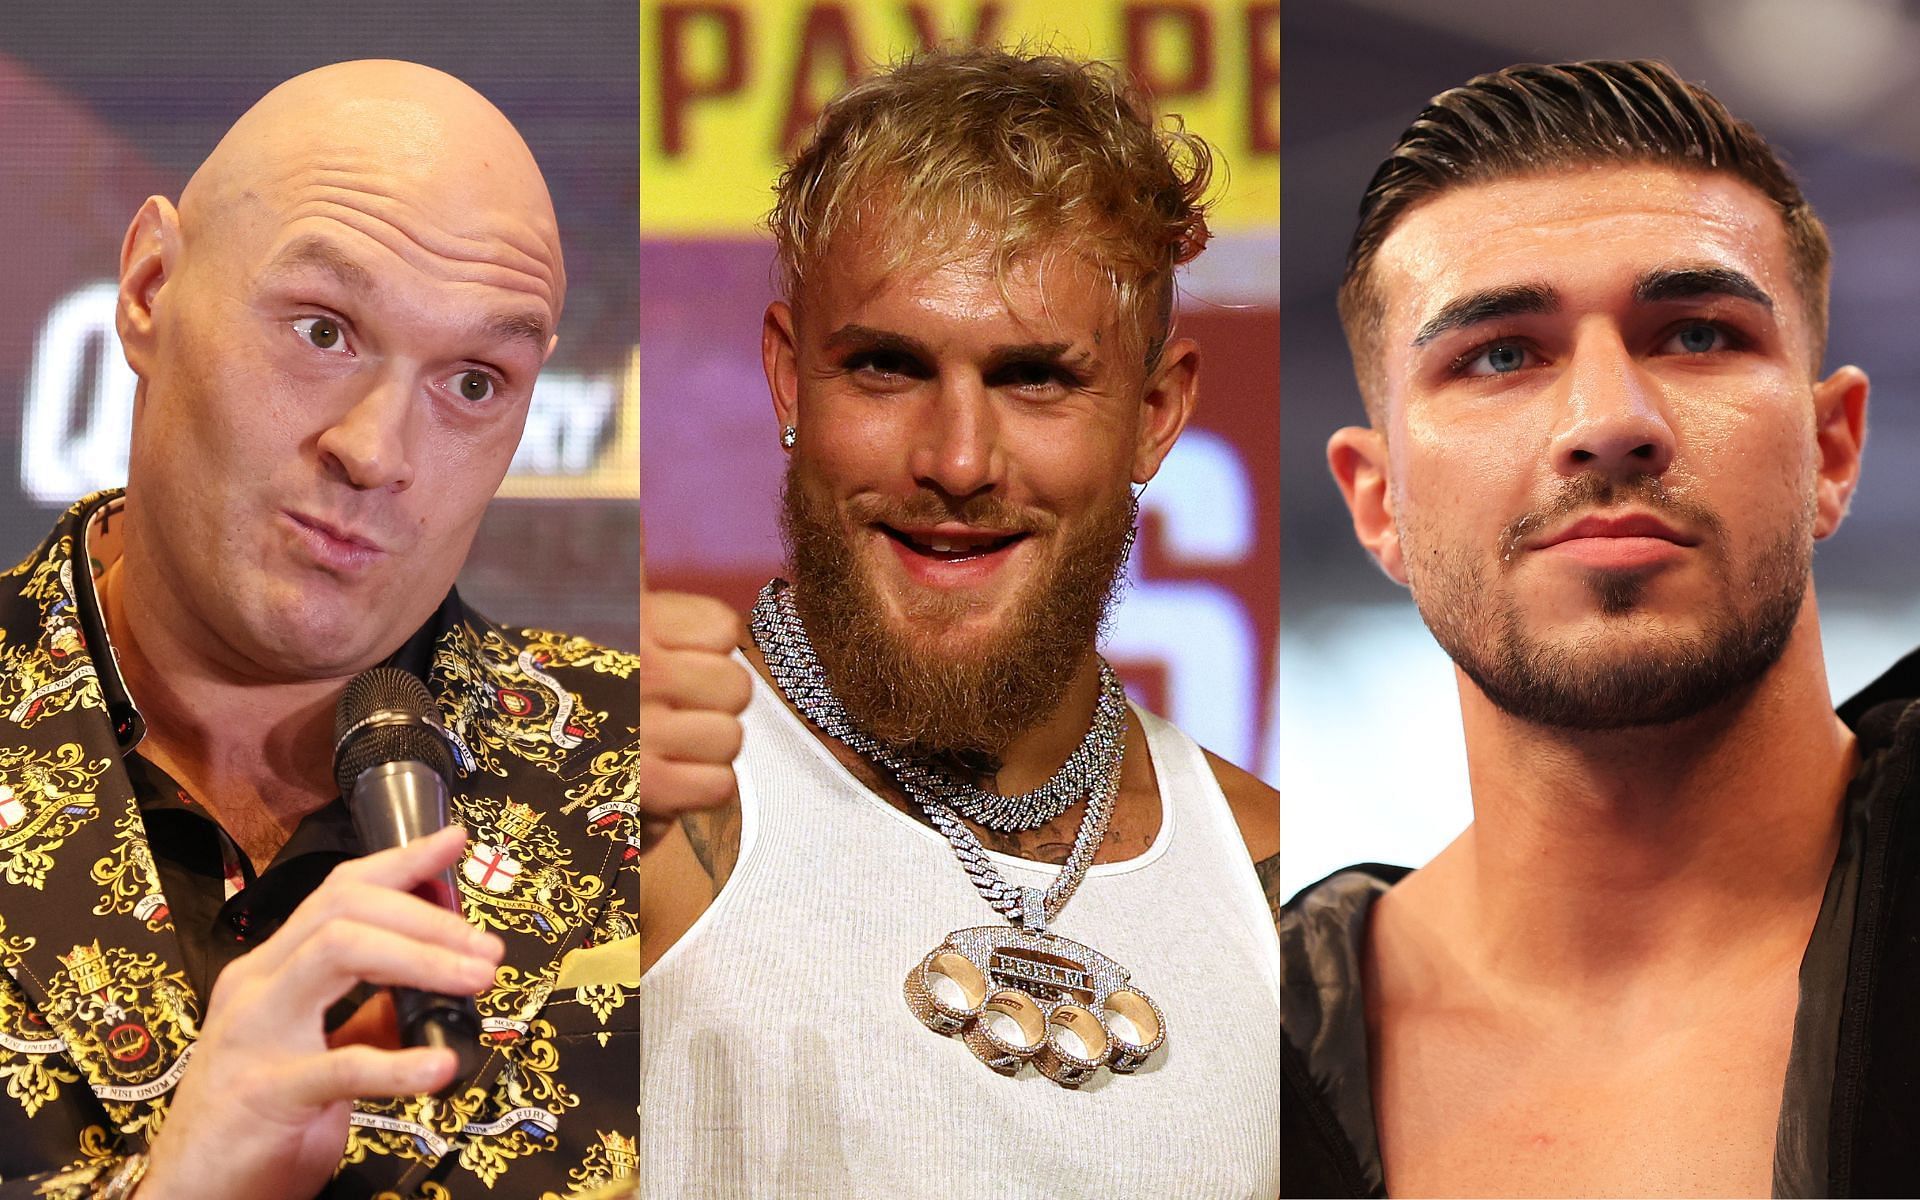 Tyson Fury (Left), Jake Paul (Middle), and Tommy Fury (Right)